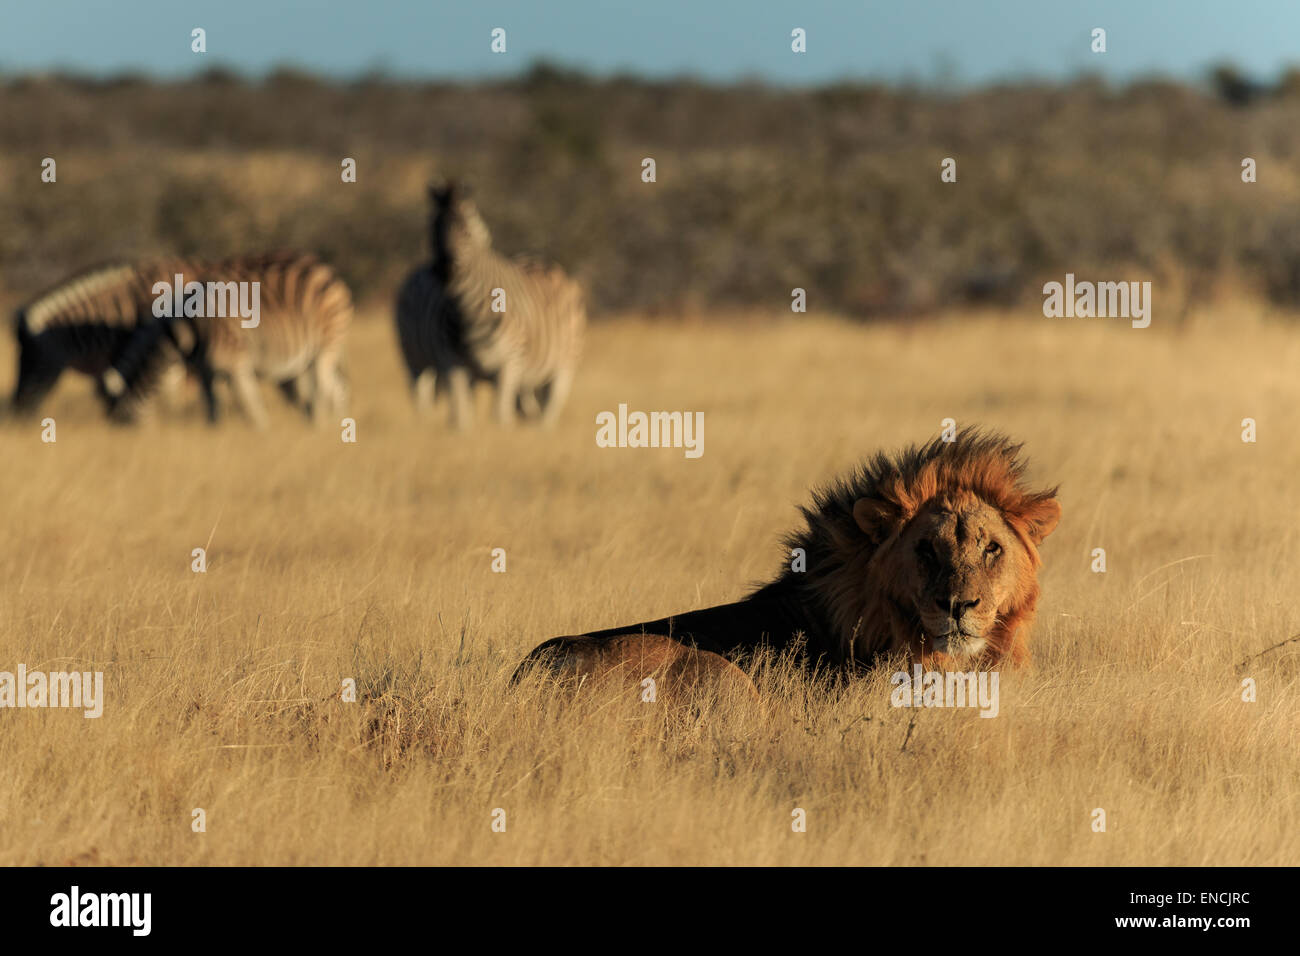 A lion resting with zebras in the background lion resting with zebras in the background. Stock Photo